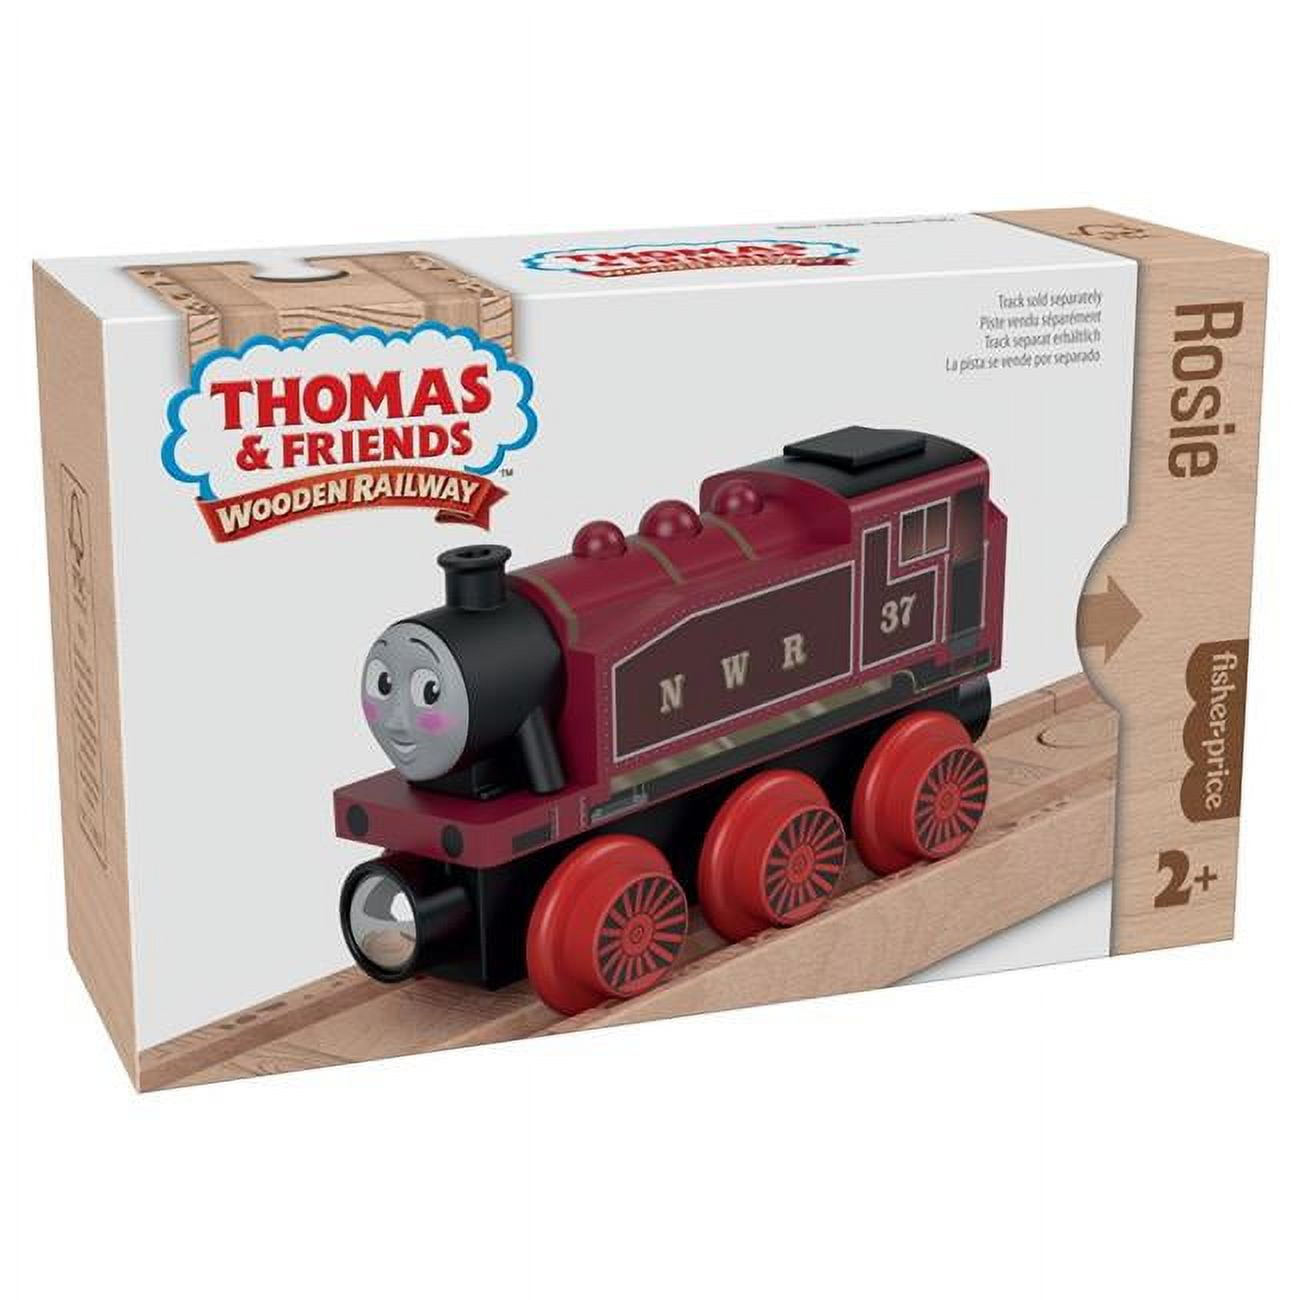 Thomas and Friends Rosie the tank engine Character Guide